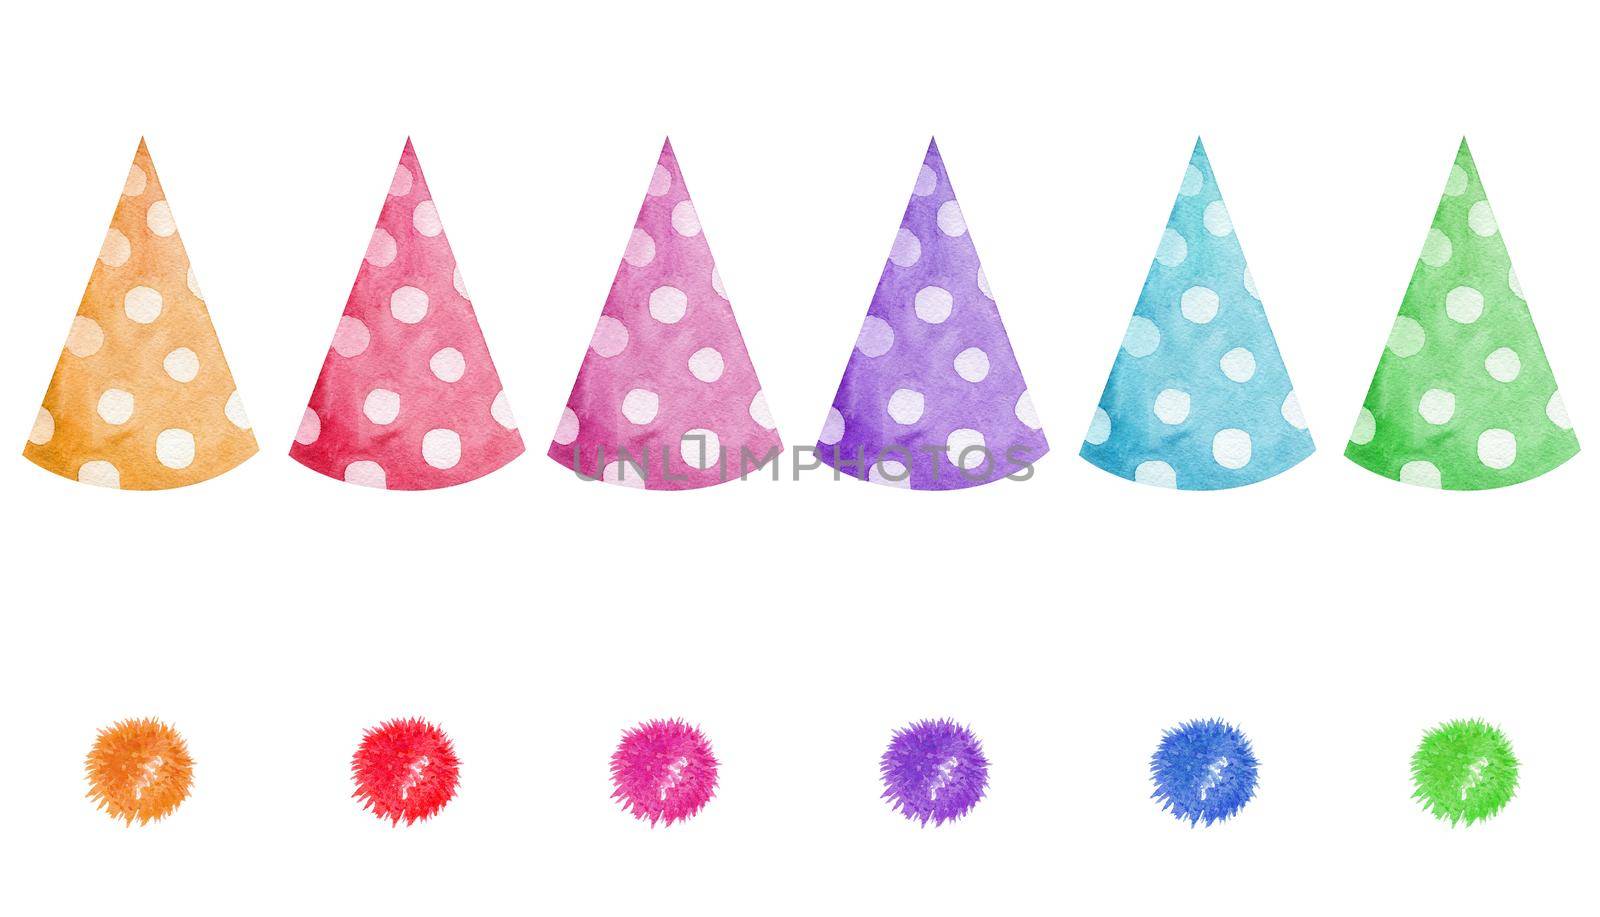 watercolor colorful party hats set isolated on white background. For birthday party decor, cards design by dreamloud